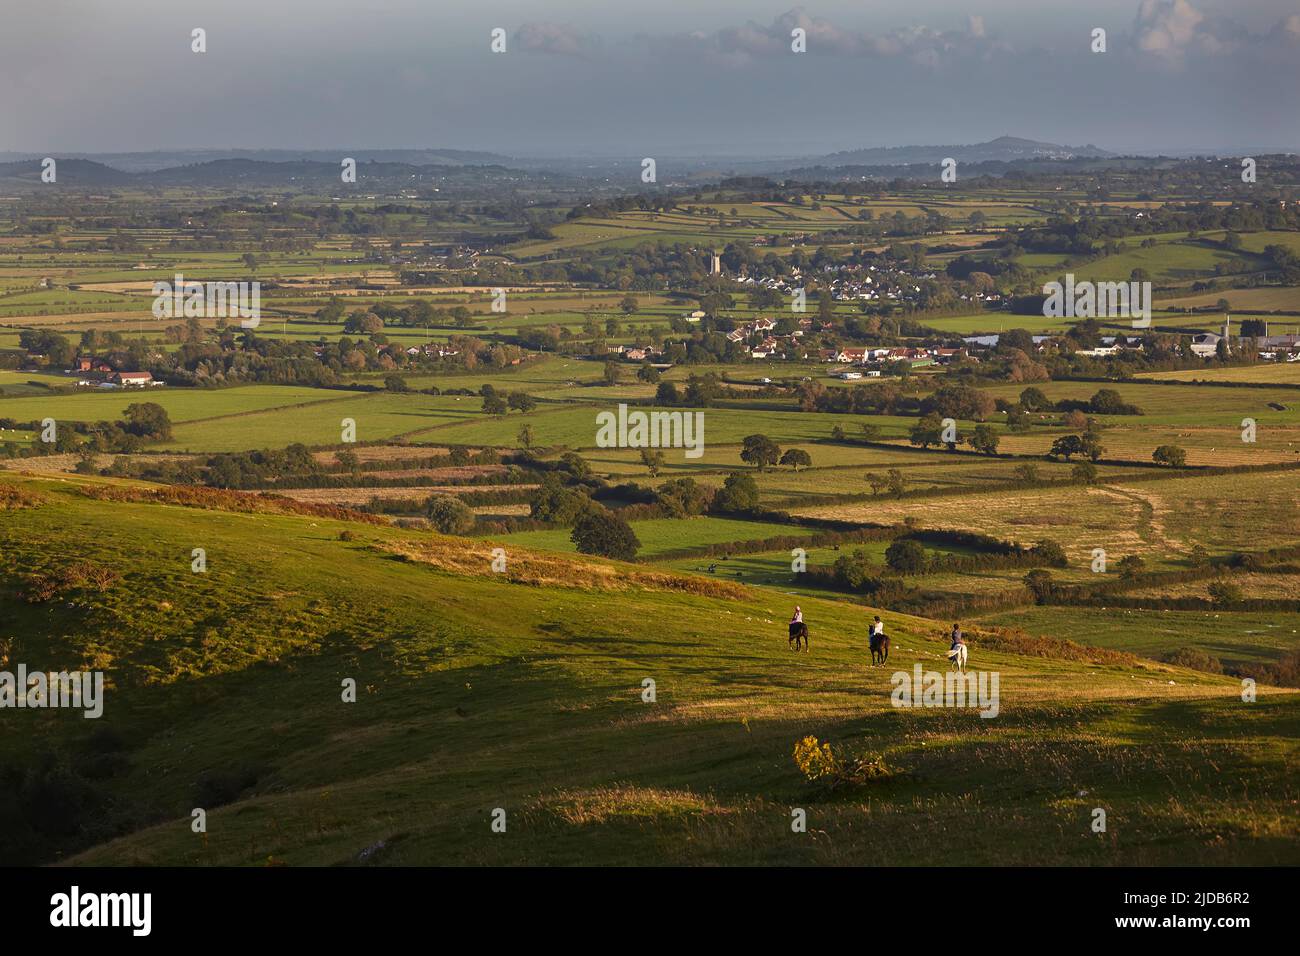 View across the countryside from the slopes of Crook Peak, Somerset, Great Britain; Somerset, England Stock Photo